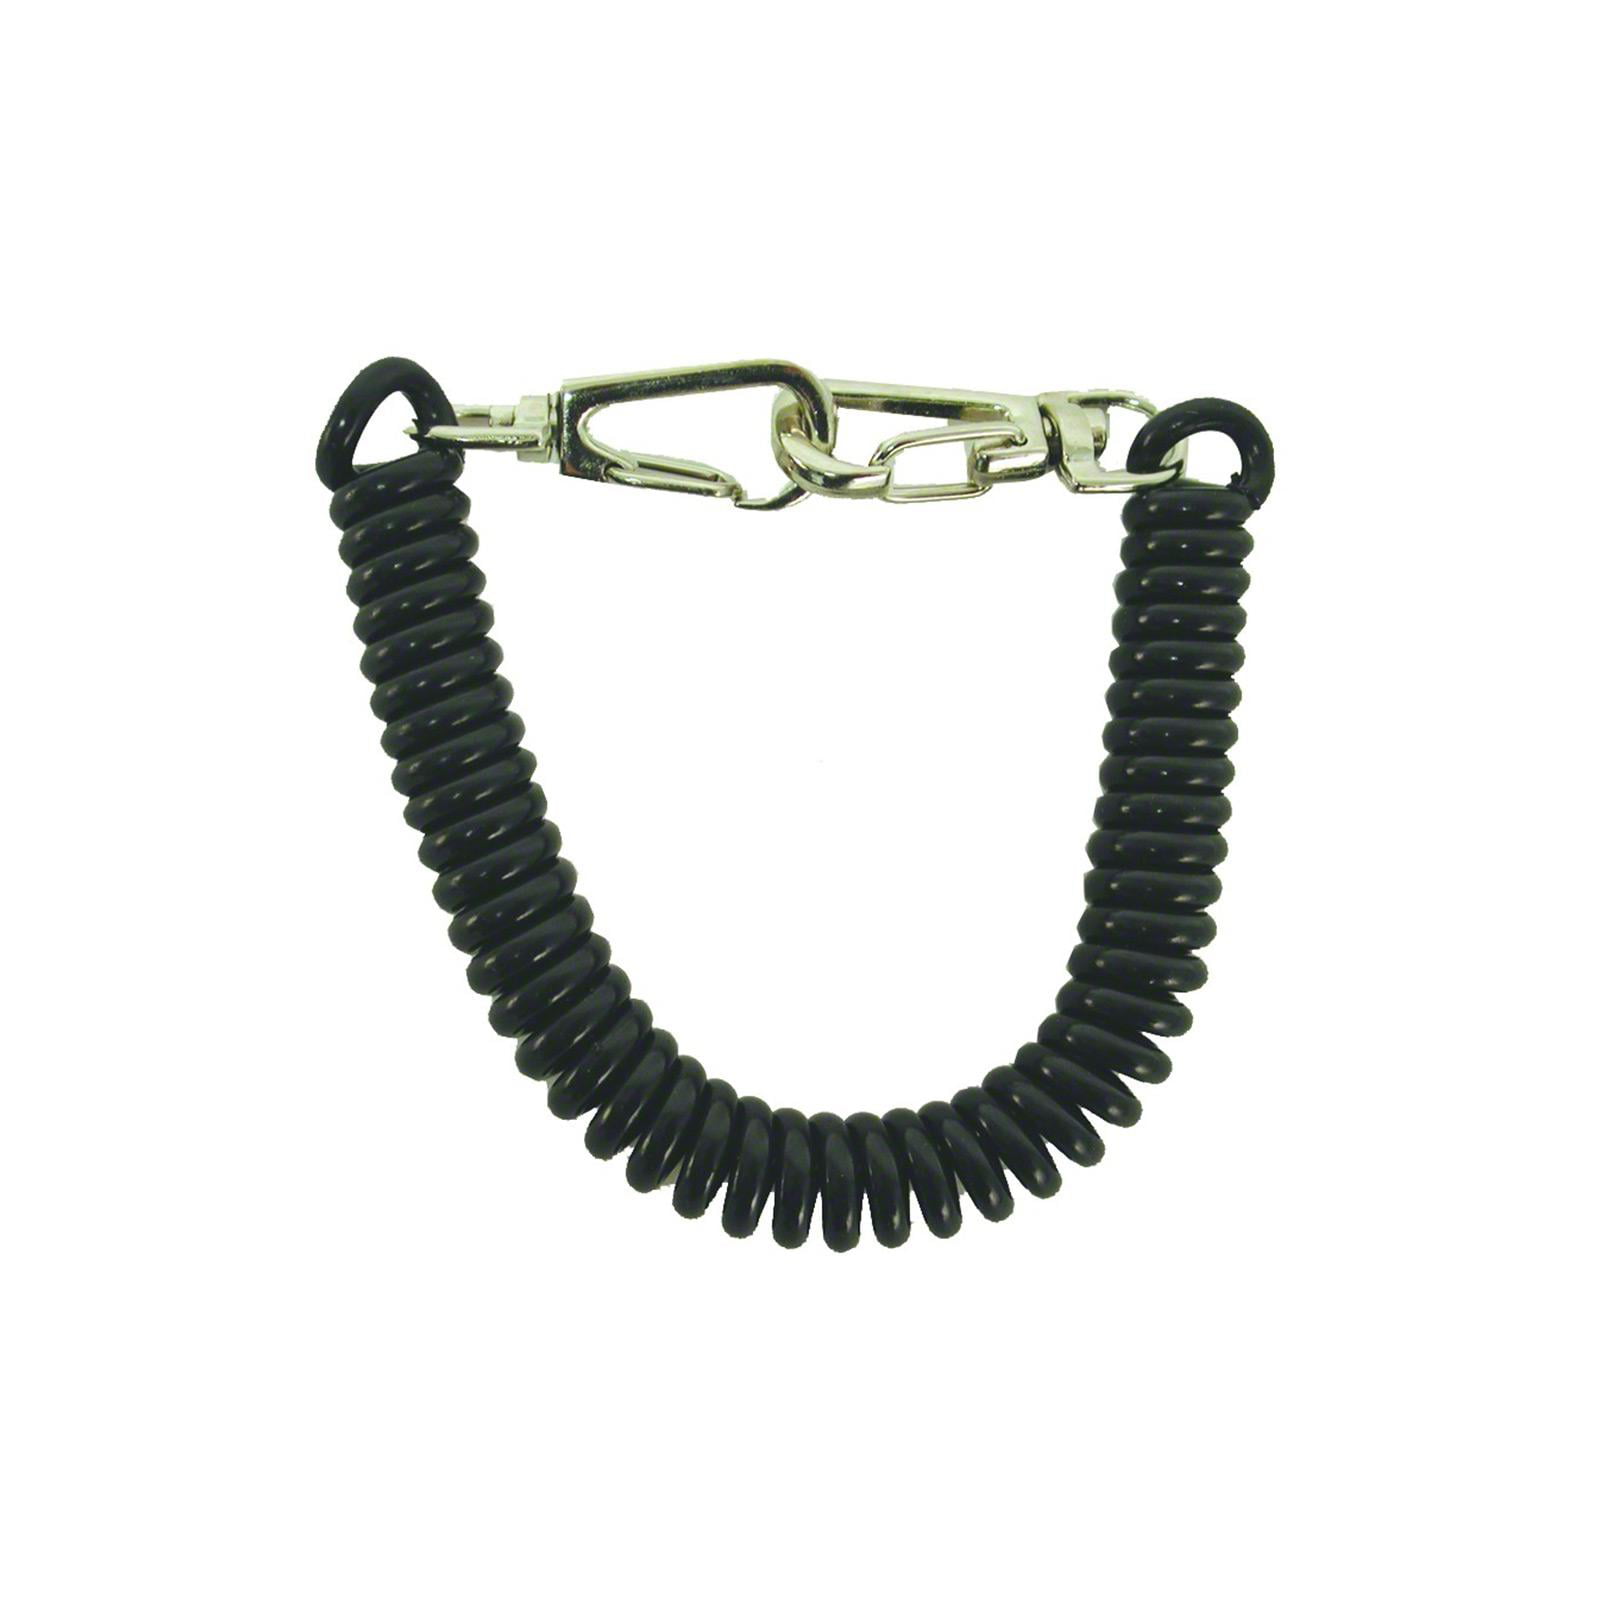 AFTCO Flexible Lanyard Plnyd18 for sale online